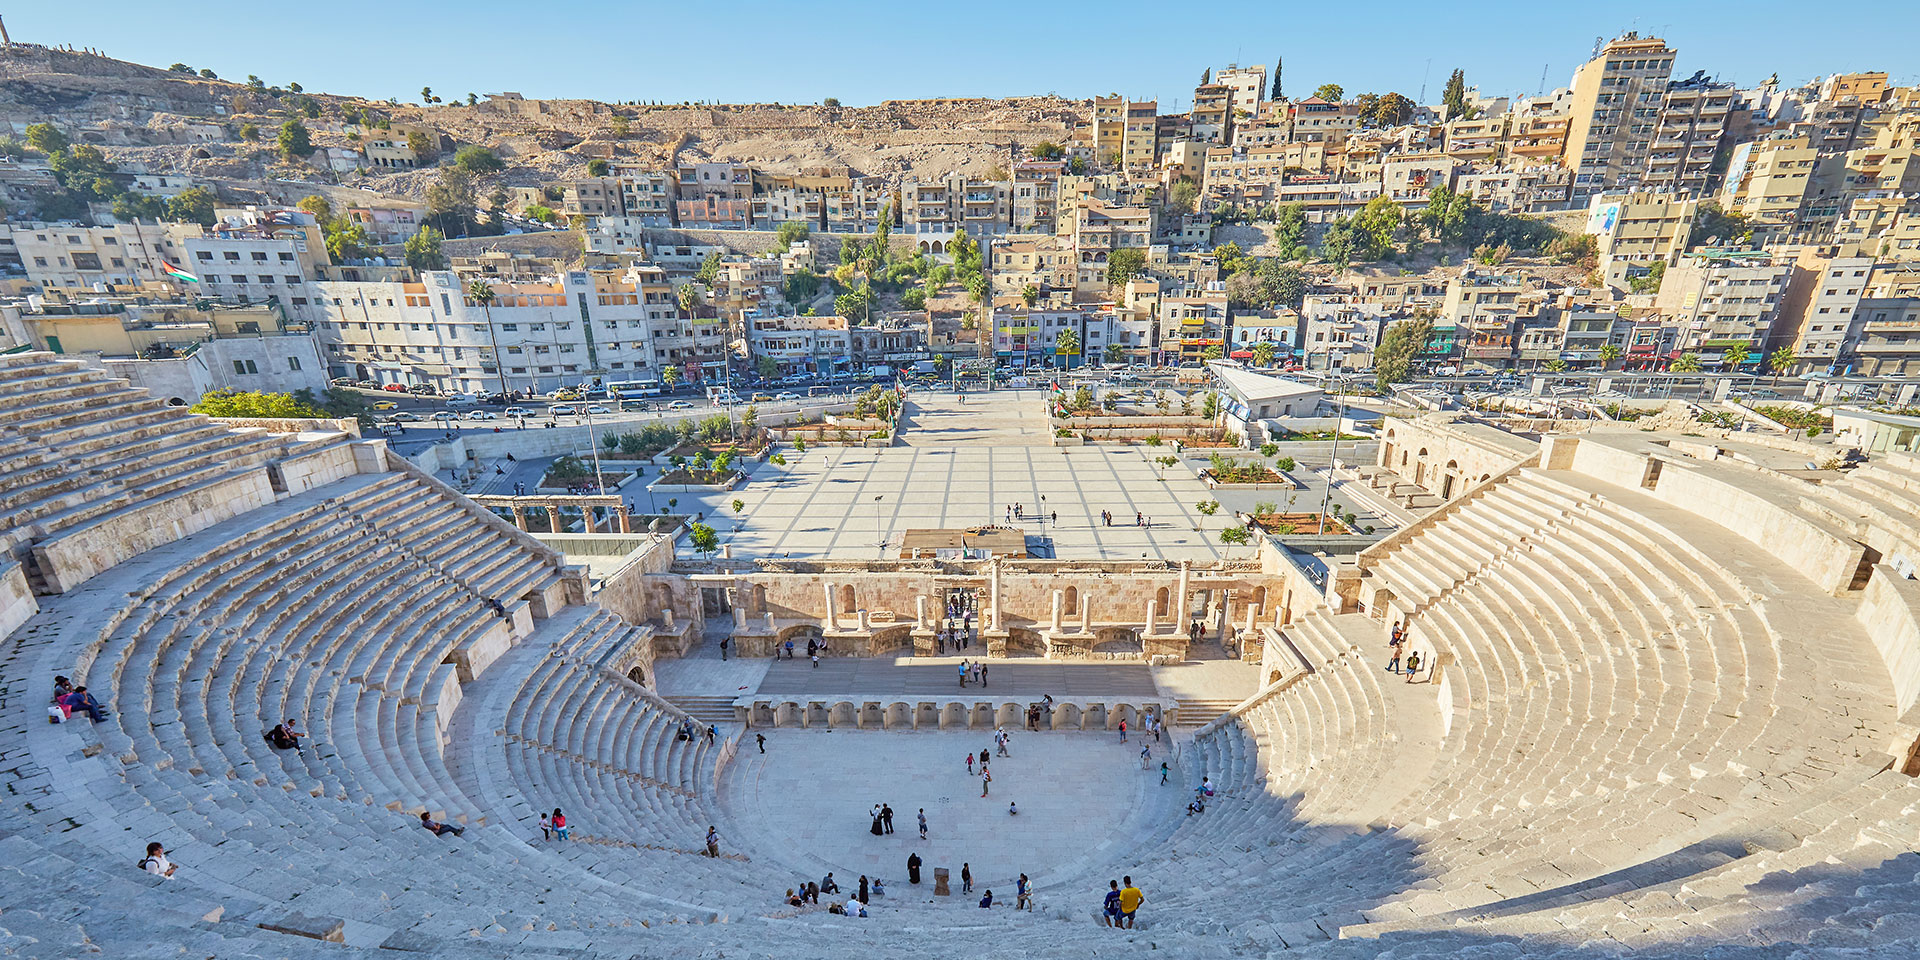 Discover Jordan with Modern Language Center MLC Experience the wonders of Petra, float in the Dead Sea, marvel at the Greco Roman ruins at Jerash or simply relax on the shores of the Red Sea at Aqaba.